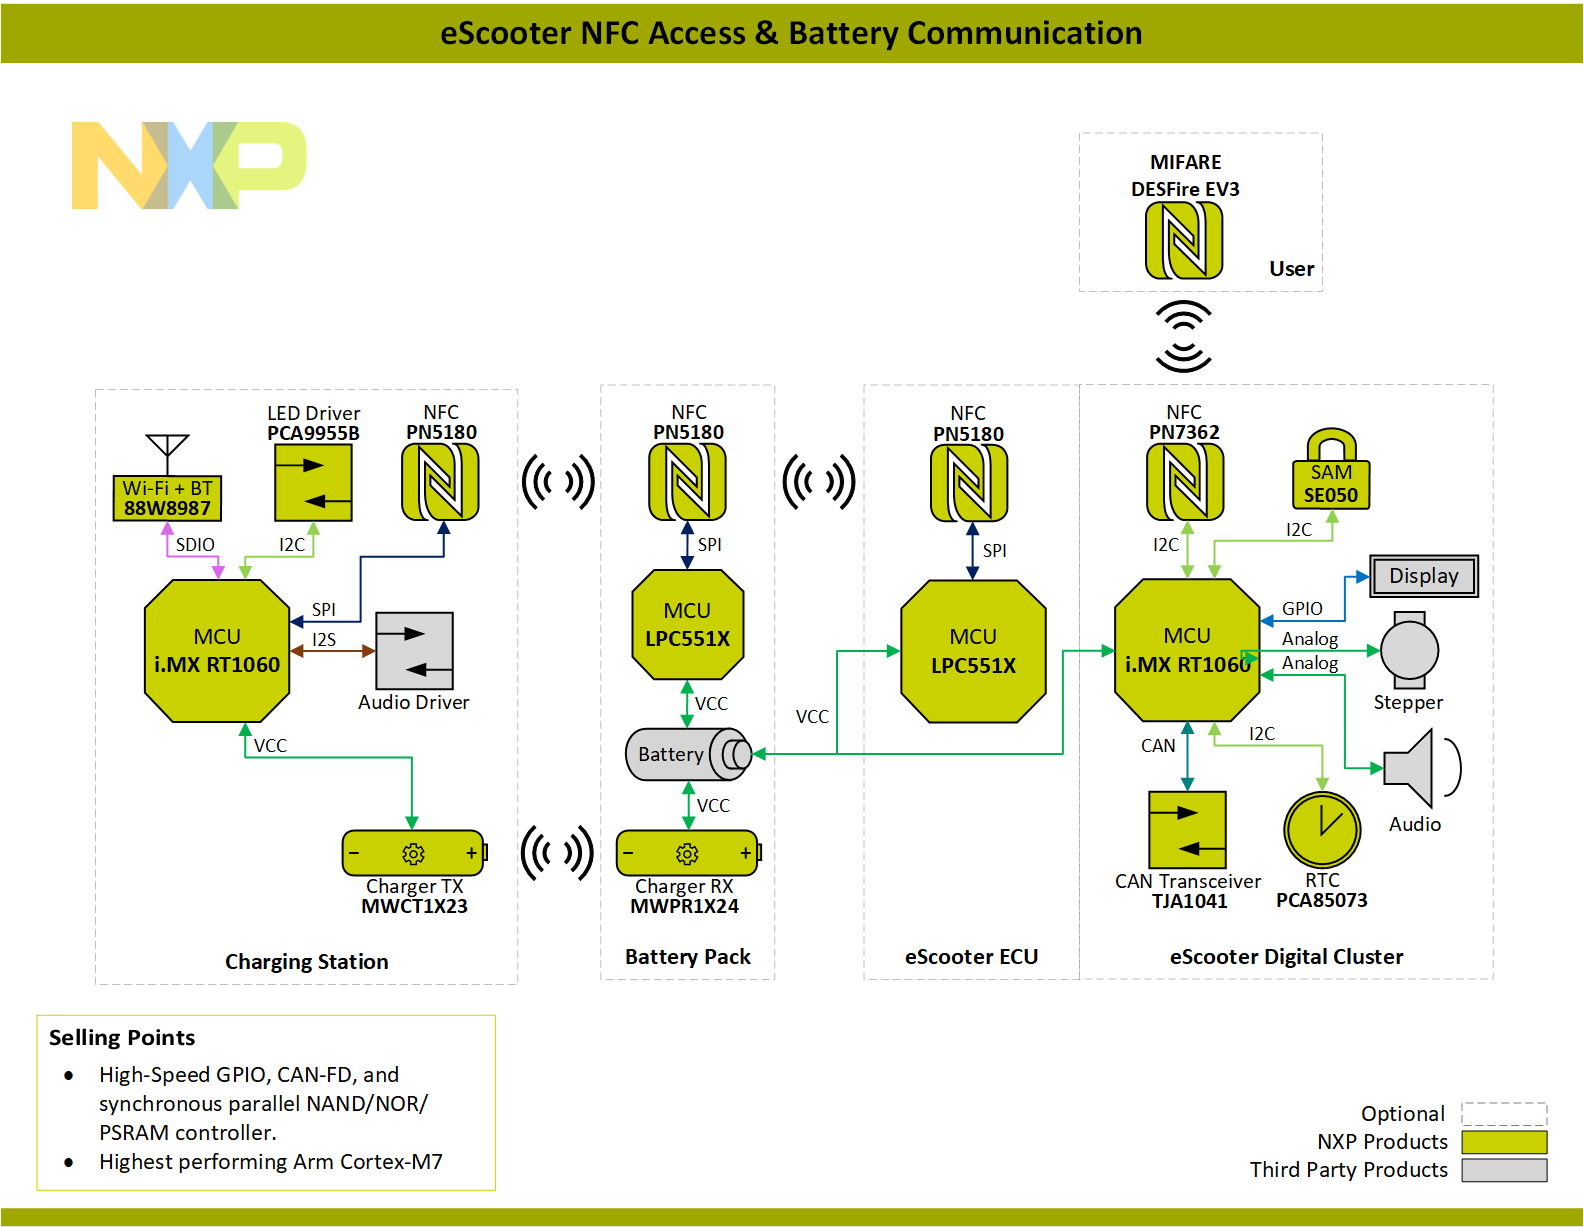 eScooter NFC Access & Battery Communication - NXP Community